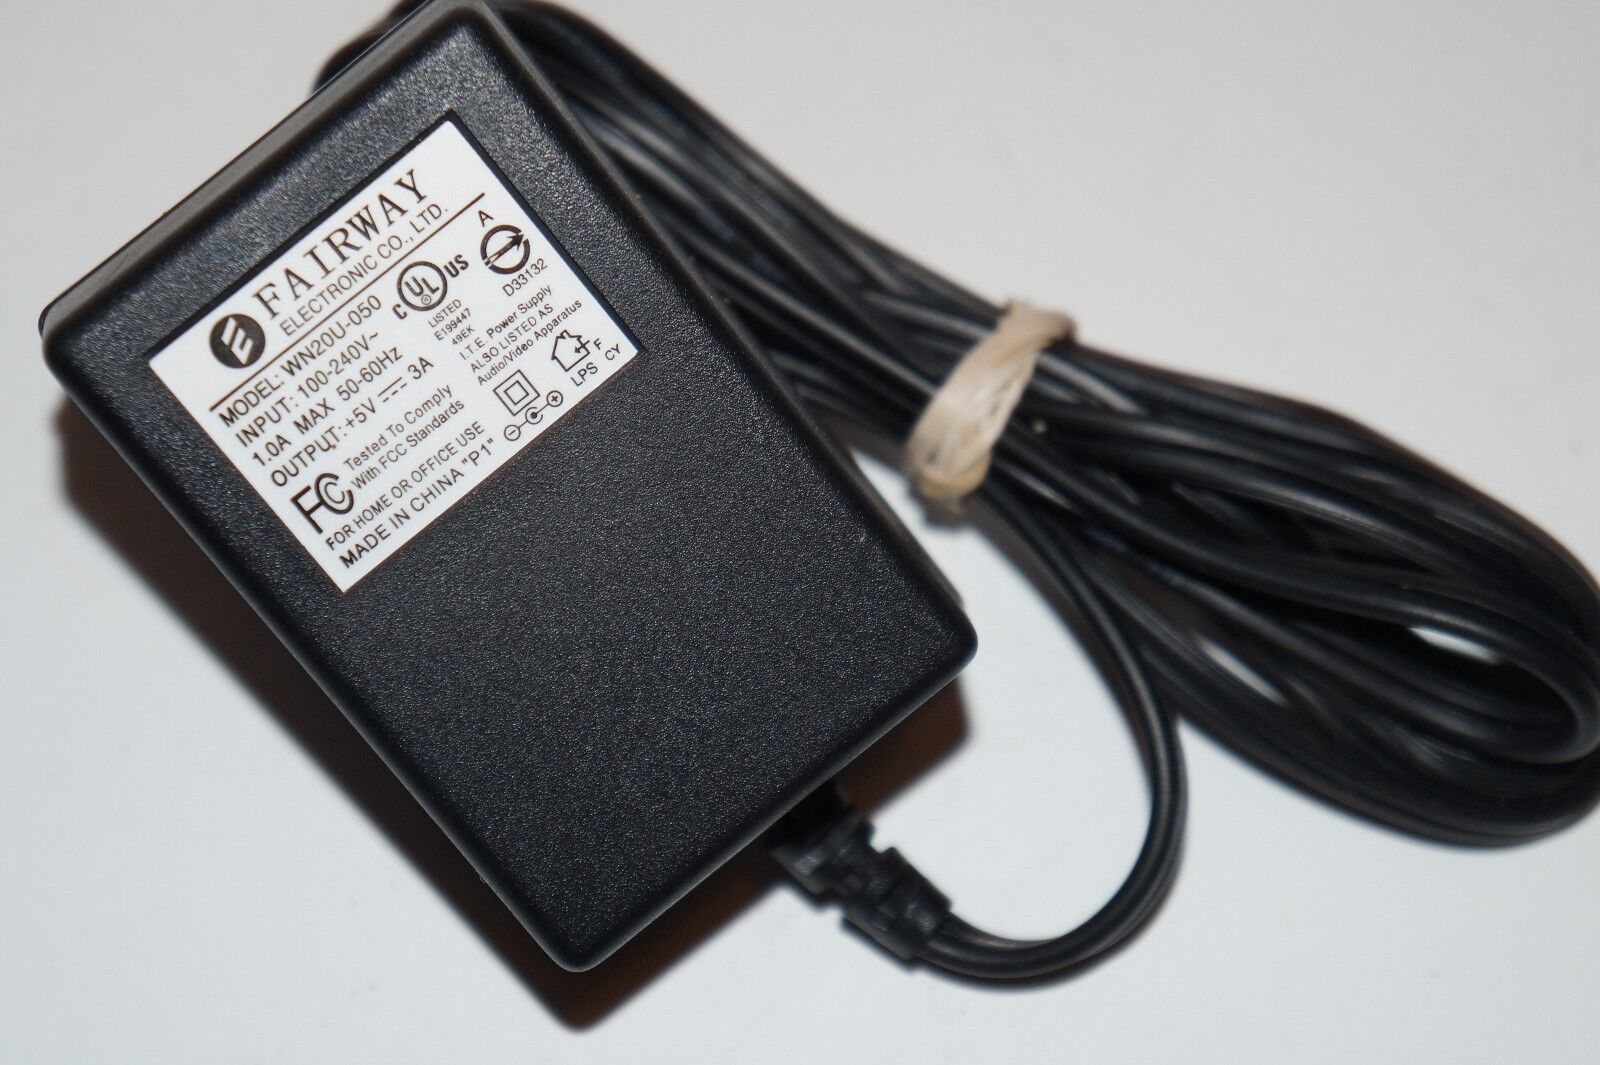 Fairway Electronic Co. AC Power Adapter WN20U-050 5v 3a Country/Region of Manufacture: China Model: WN20U-050 Color: